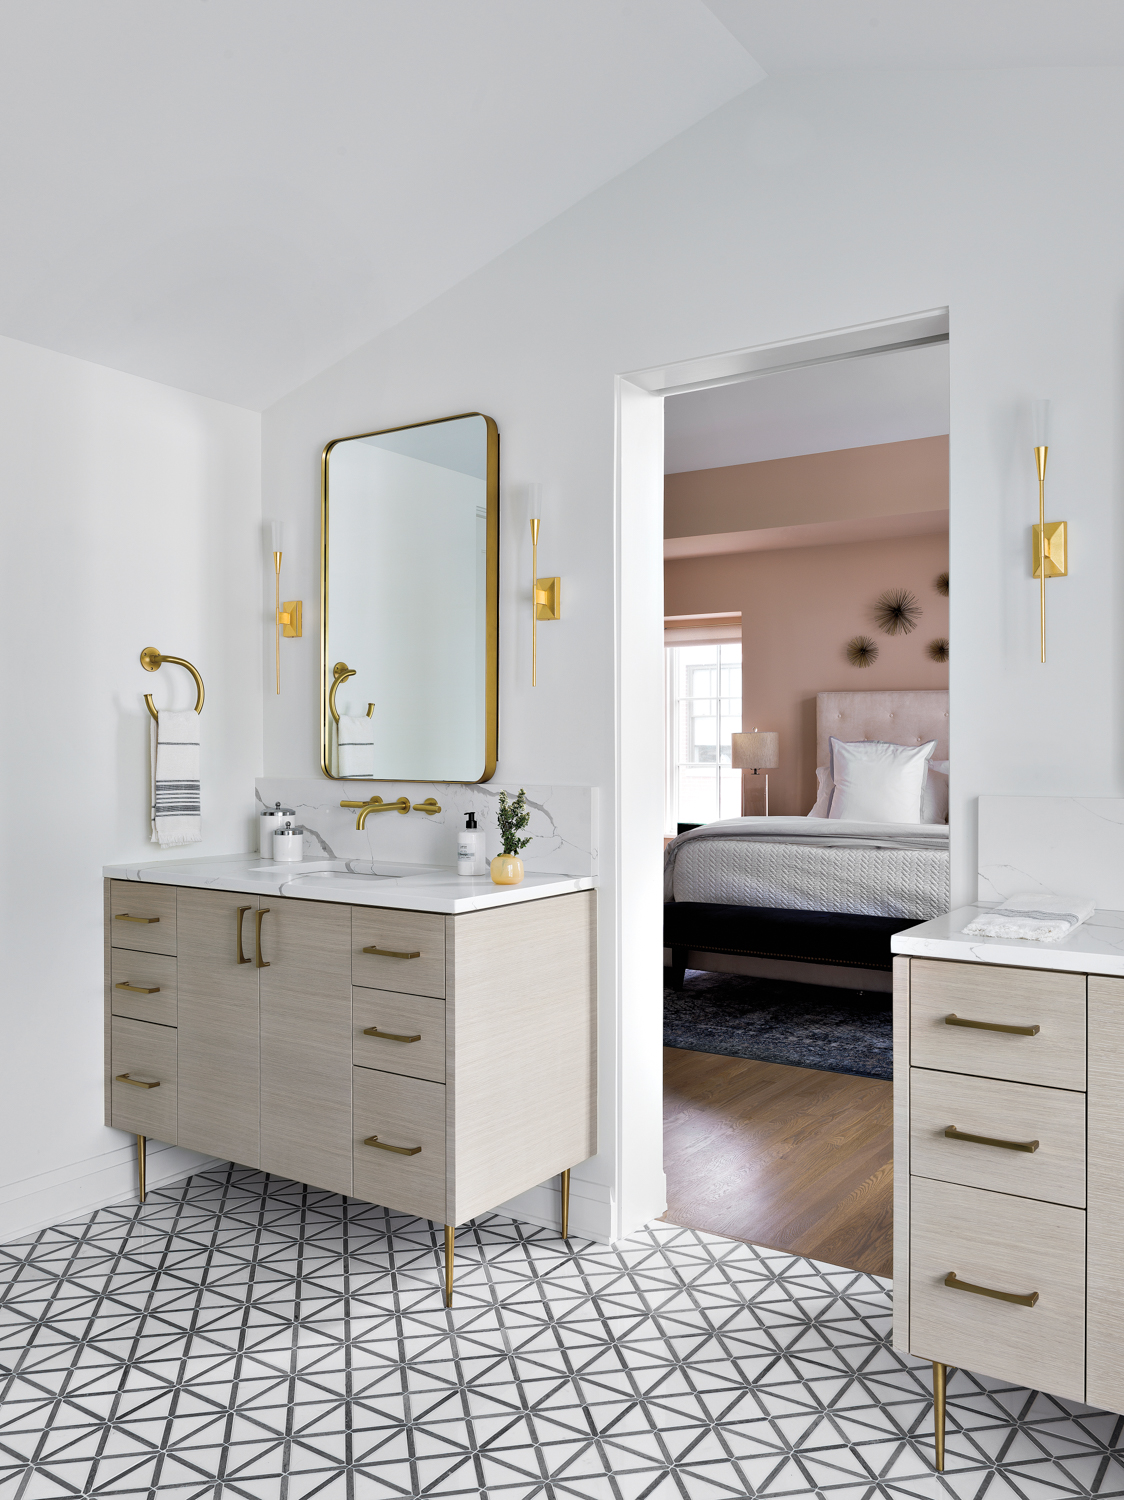 A bathroom with a geometric tile floor and matching white oak vanities. It provides a peek into the main bedroom which has pink walls.